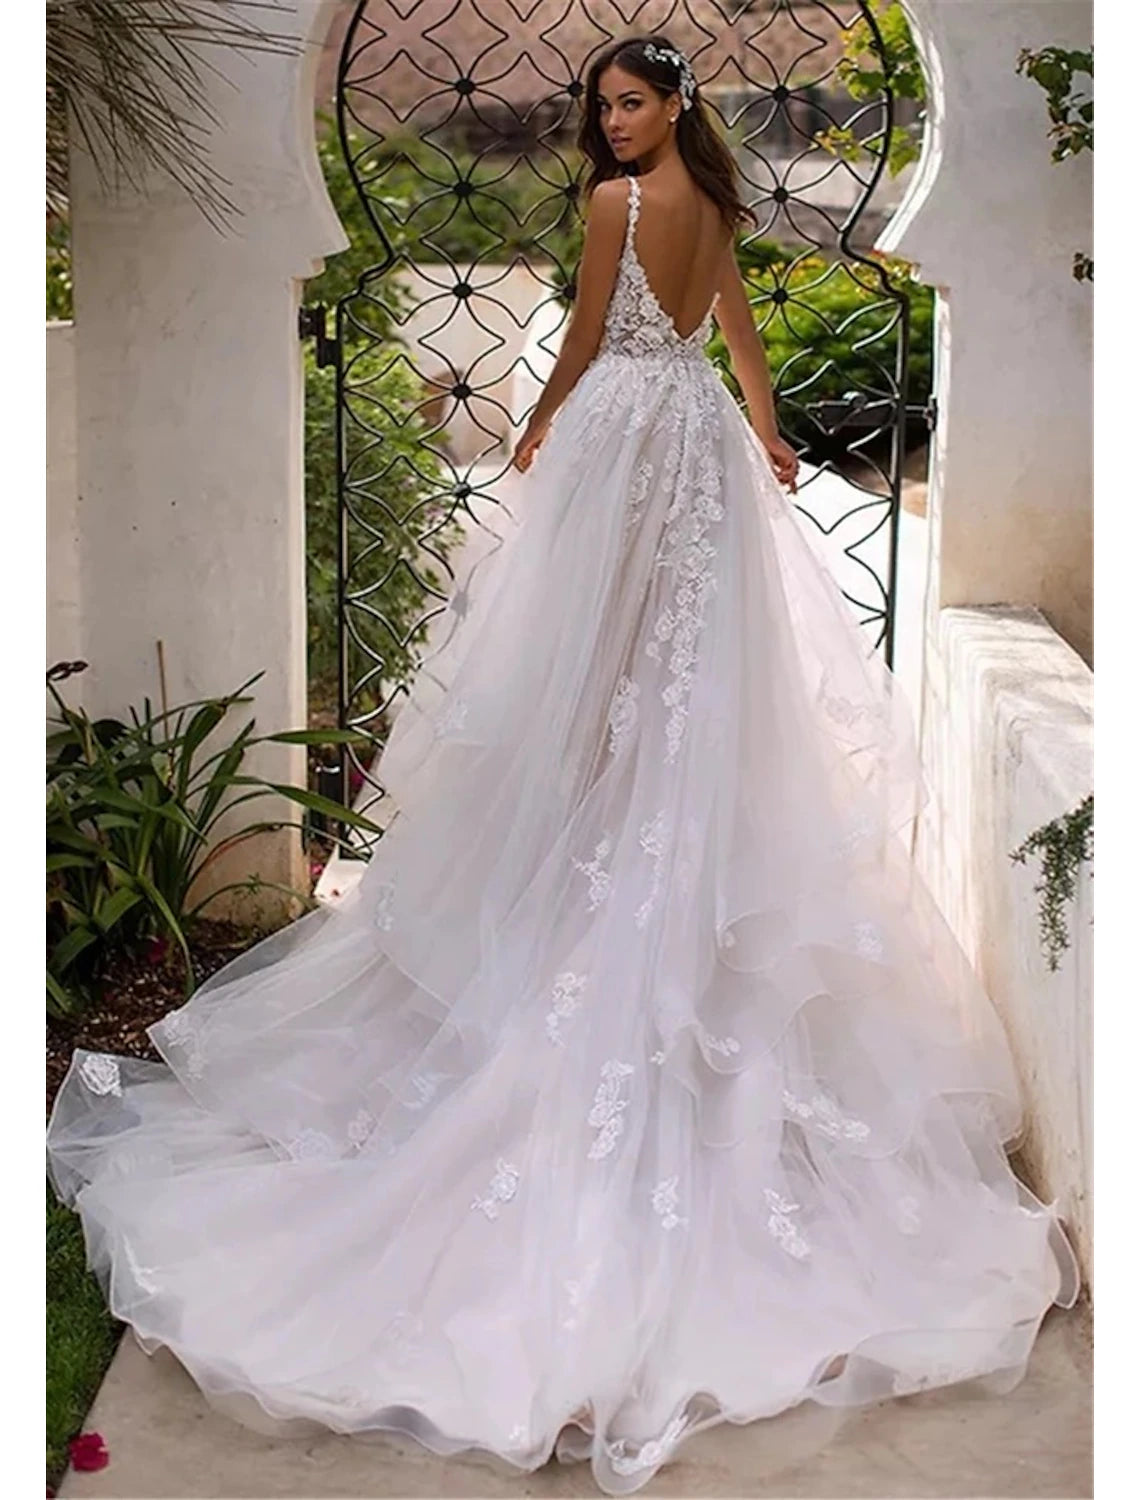 Beach Open Back Sexy Wedding Dresses A-Line Sweetheart Regular Straps Chapel Train Lace Bridal Gowns With Appliques